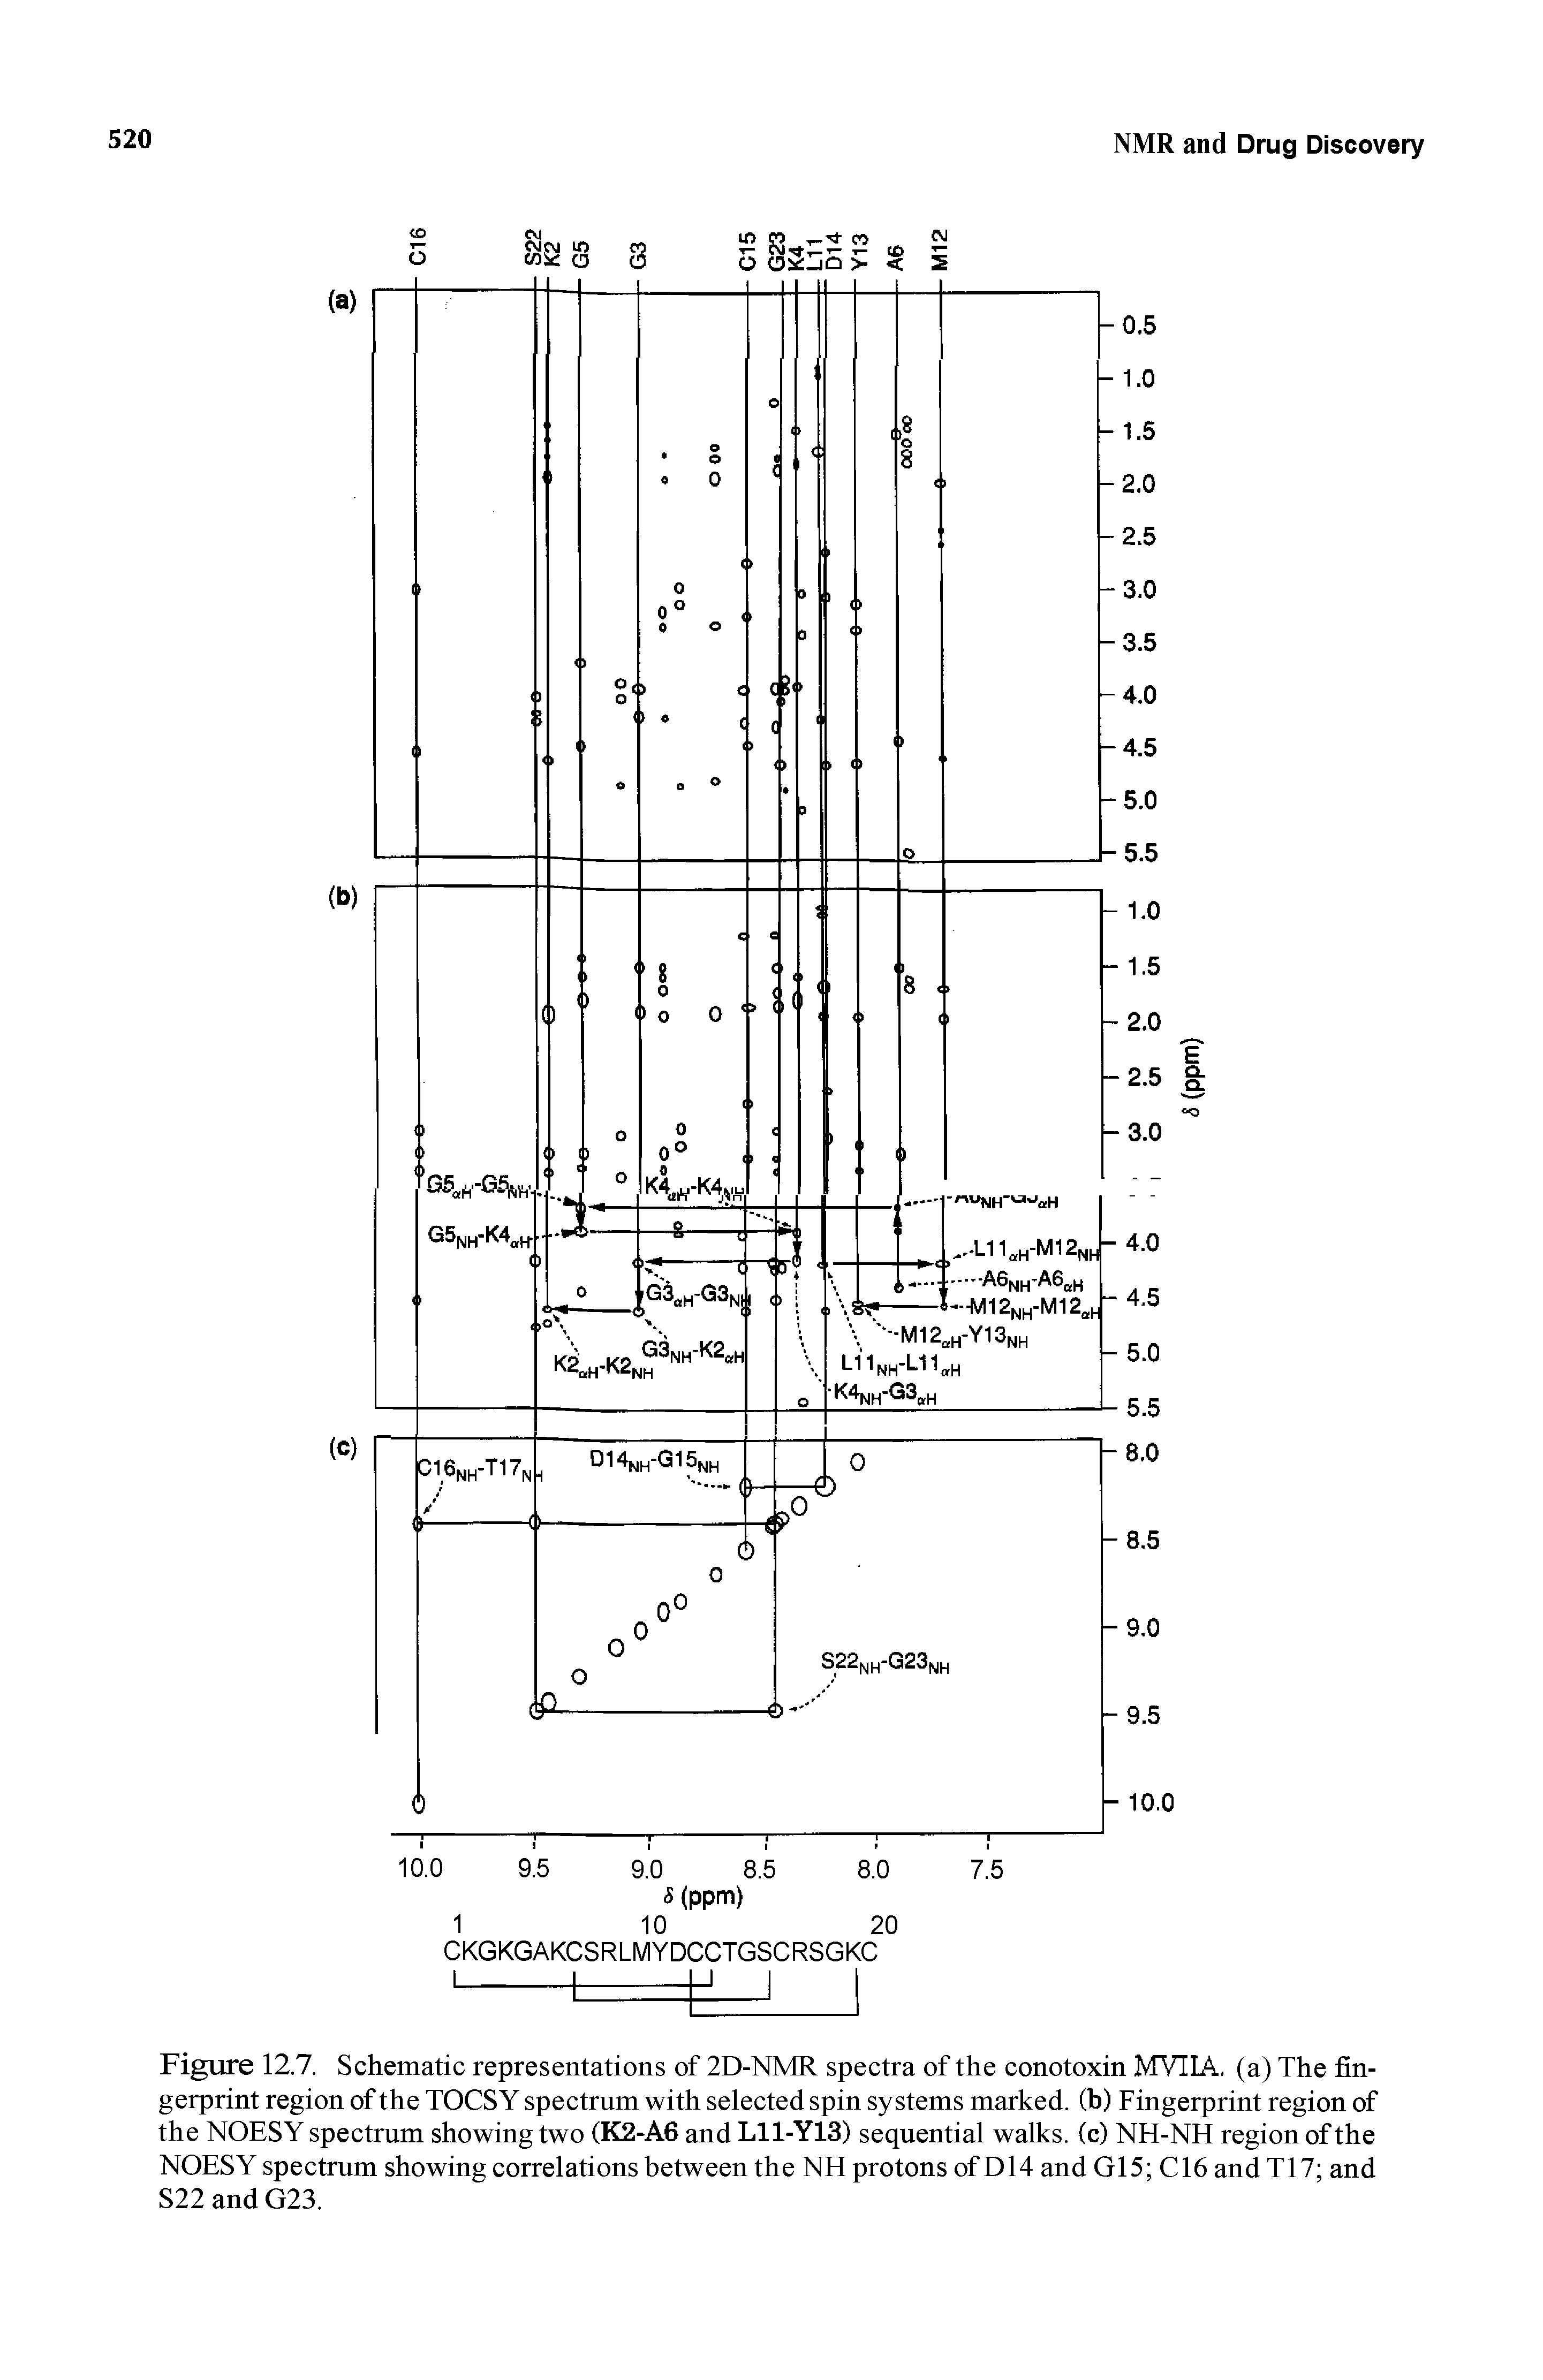 Figure 12.7. Schematic representations of 2D-NMR spectra of the conotoxin MVIIA, (a) The fingerprint region of the TOCSY spectrum with selected spin systems marked, (b) Fingerprint region of the NOESY spectrum showing two (K2-A6 and L11-Y13) sequential walks, (c) NH-NH region of the NOESY spectrum showing correlations between the NH protons of D14 and G15 C16 and T17 and S22 and G23.